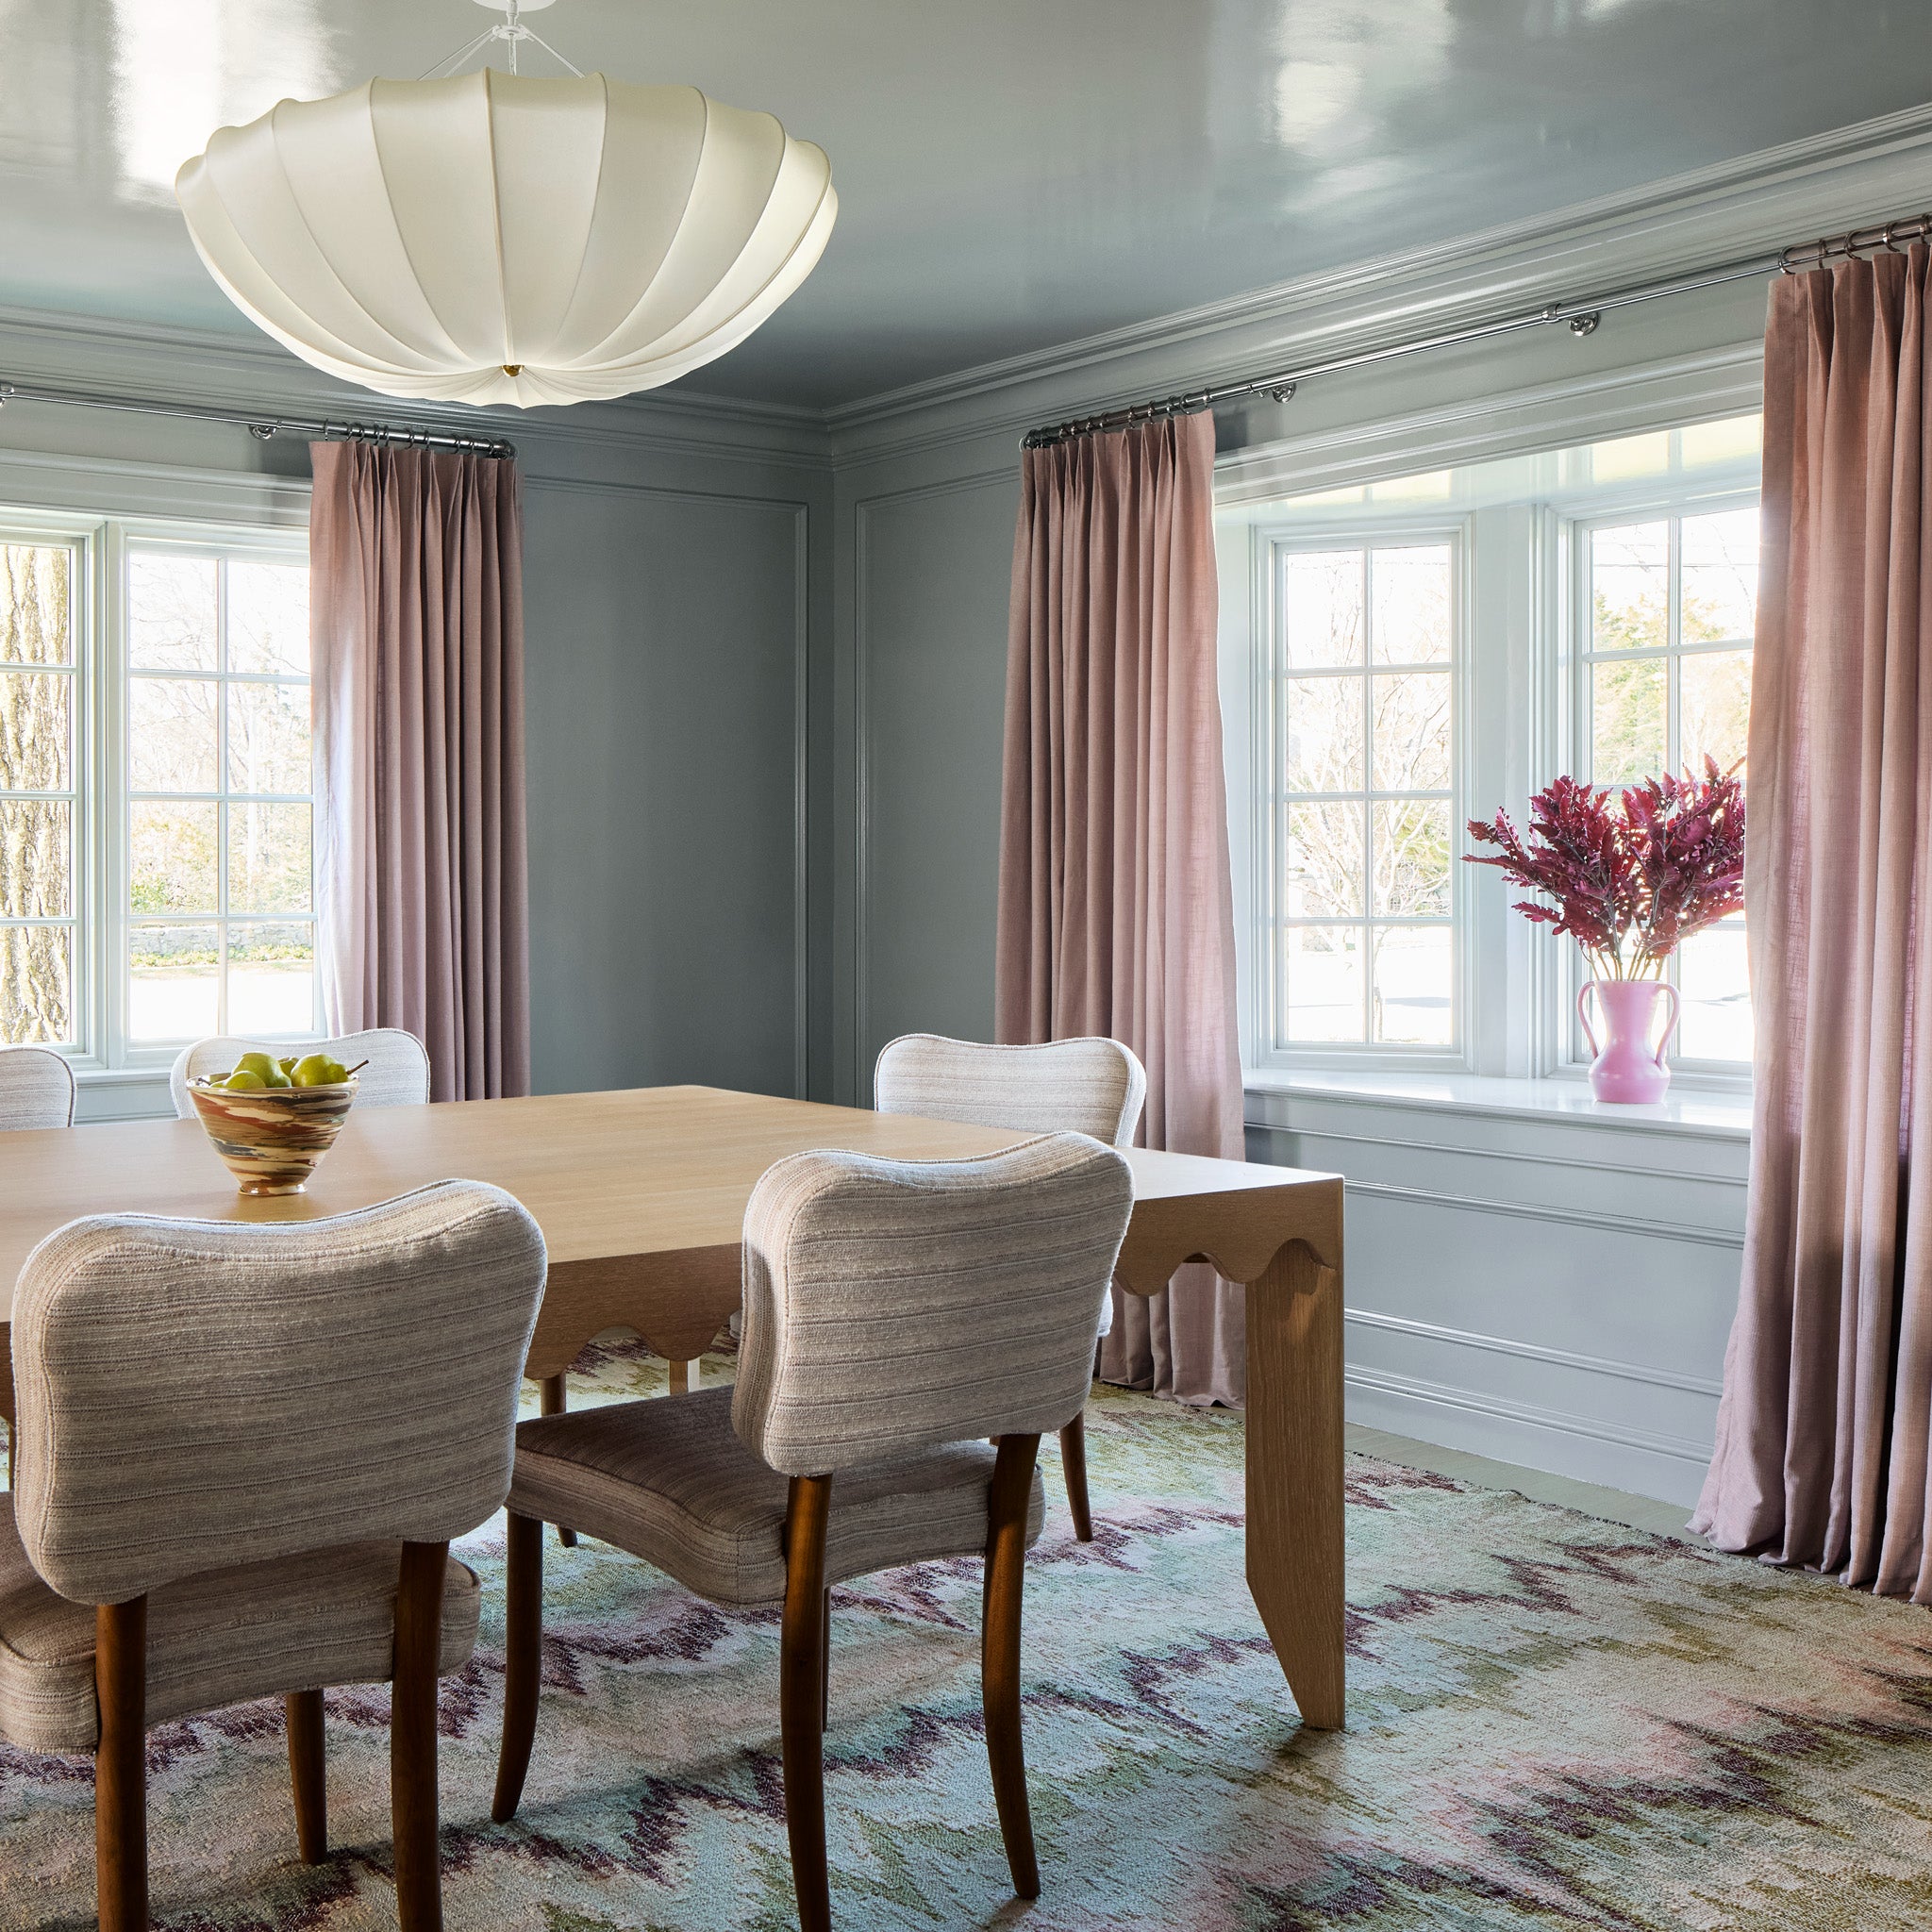 pink curtains on metal rods in front of illuminated windows in a light blue dining room 